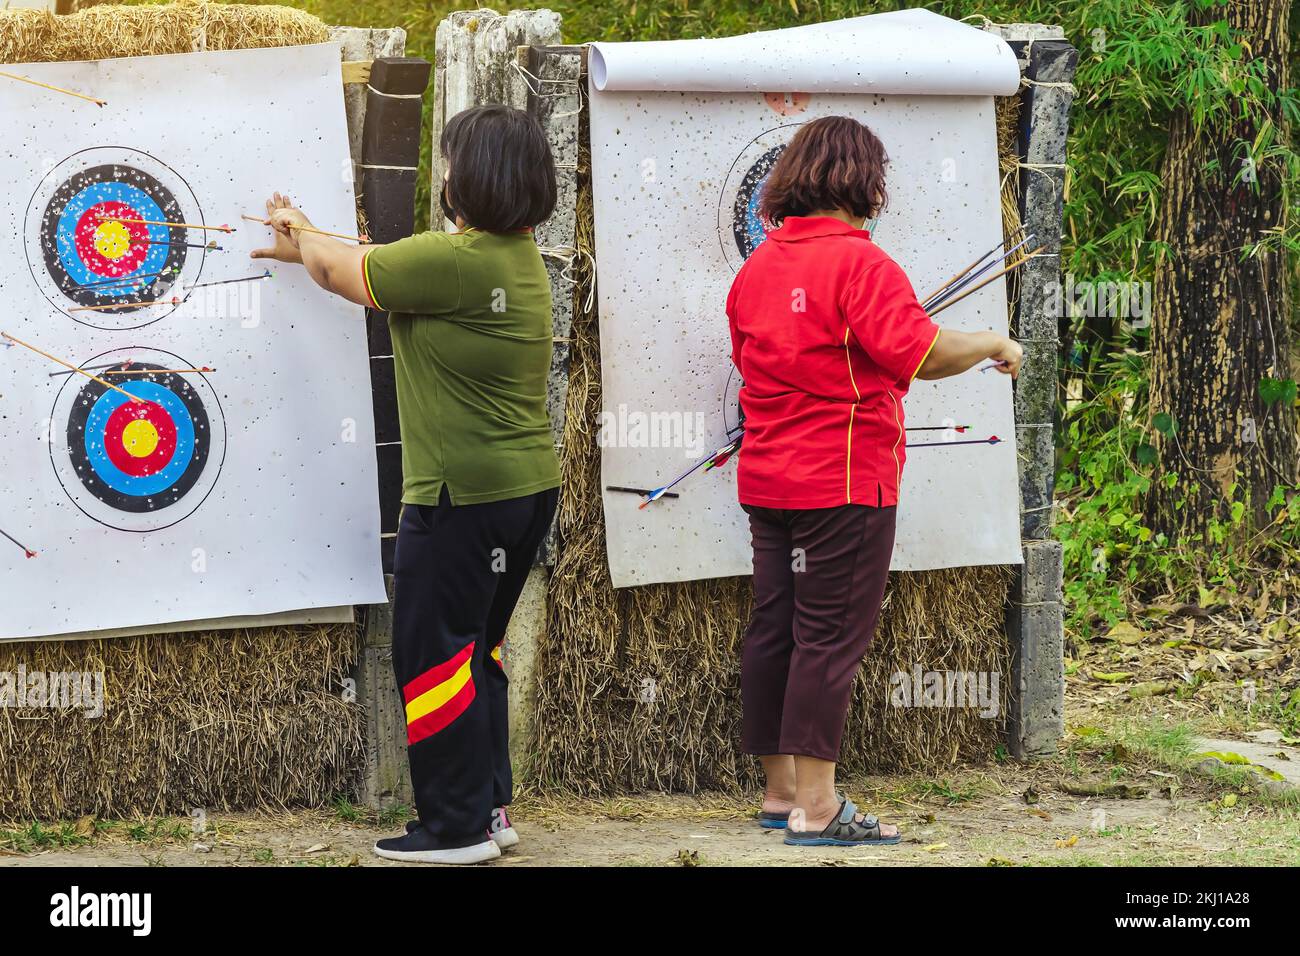 Back view of female officer wear face mask collect arrows fired from a bow on sport target. Women clearing arrows from target to start new game. Medit Stock Photo